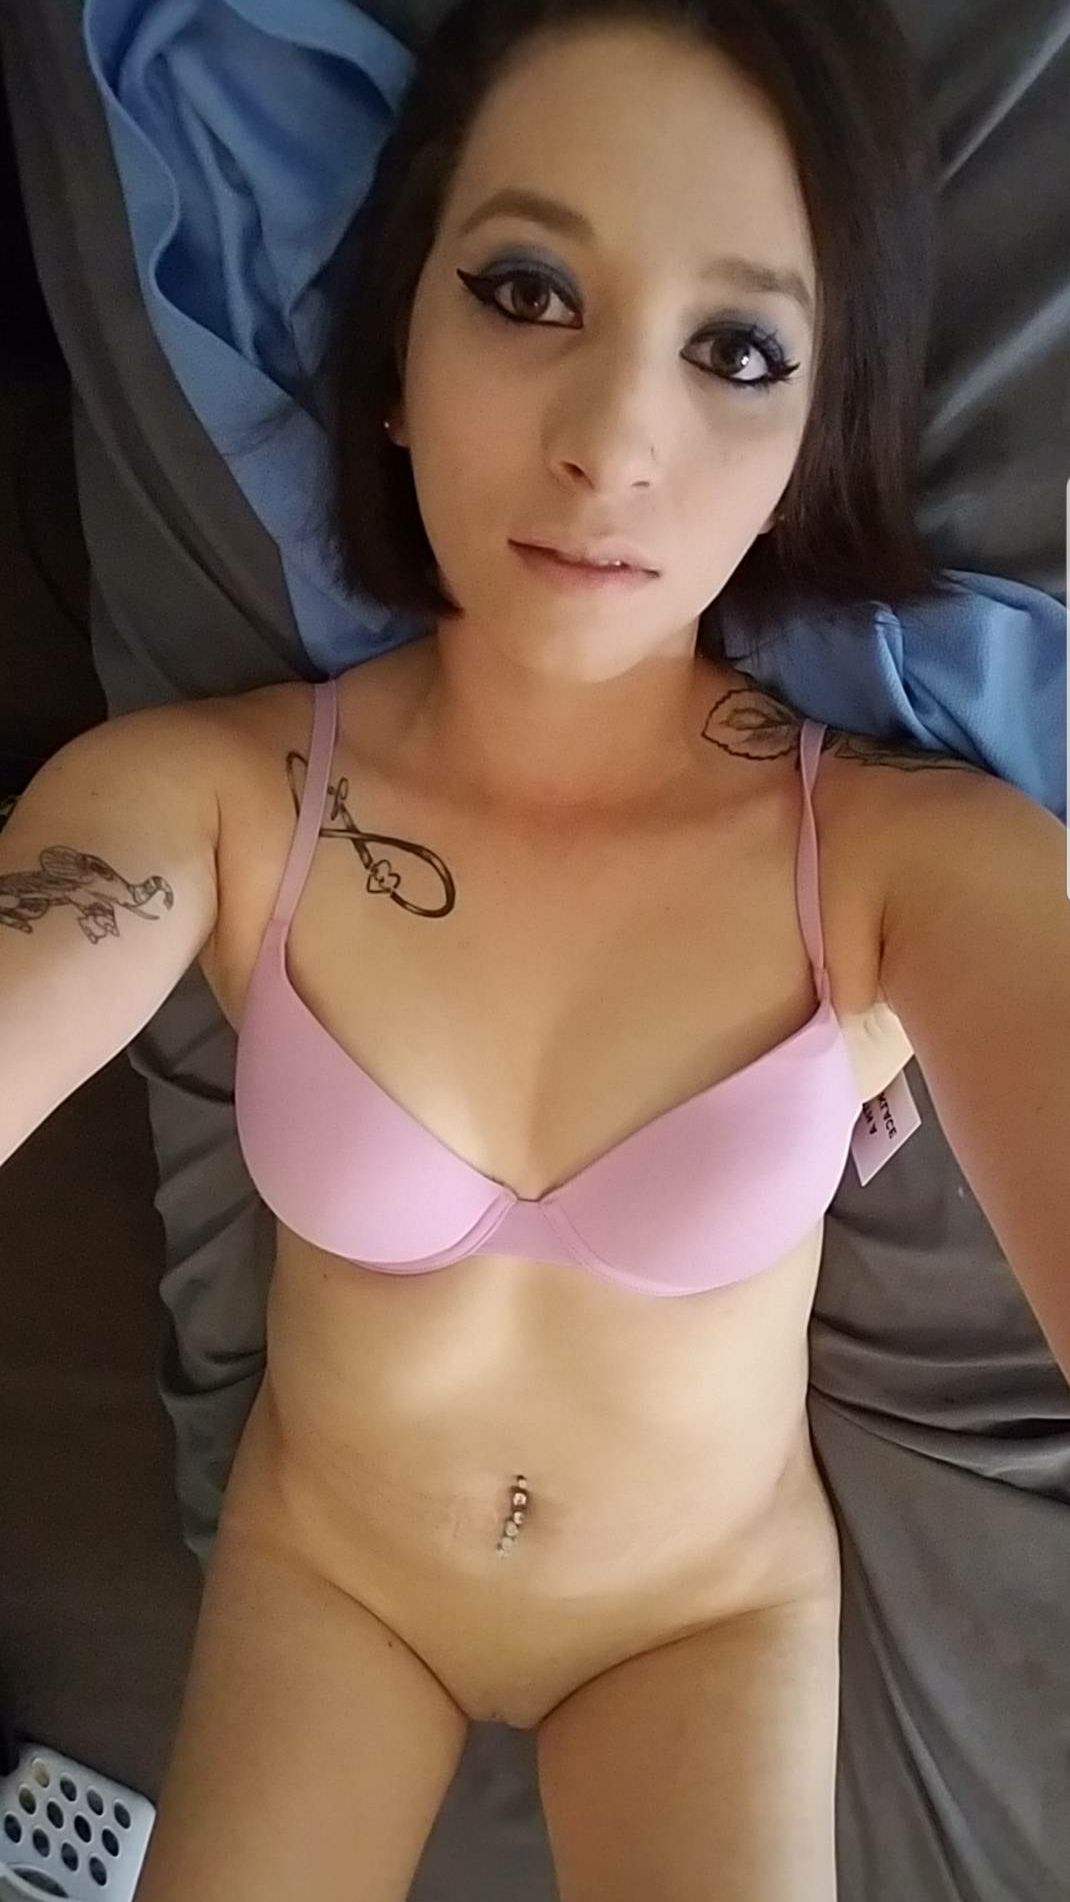 The less clothes the better babe. F 26